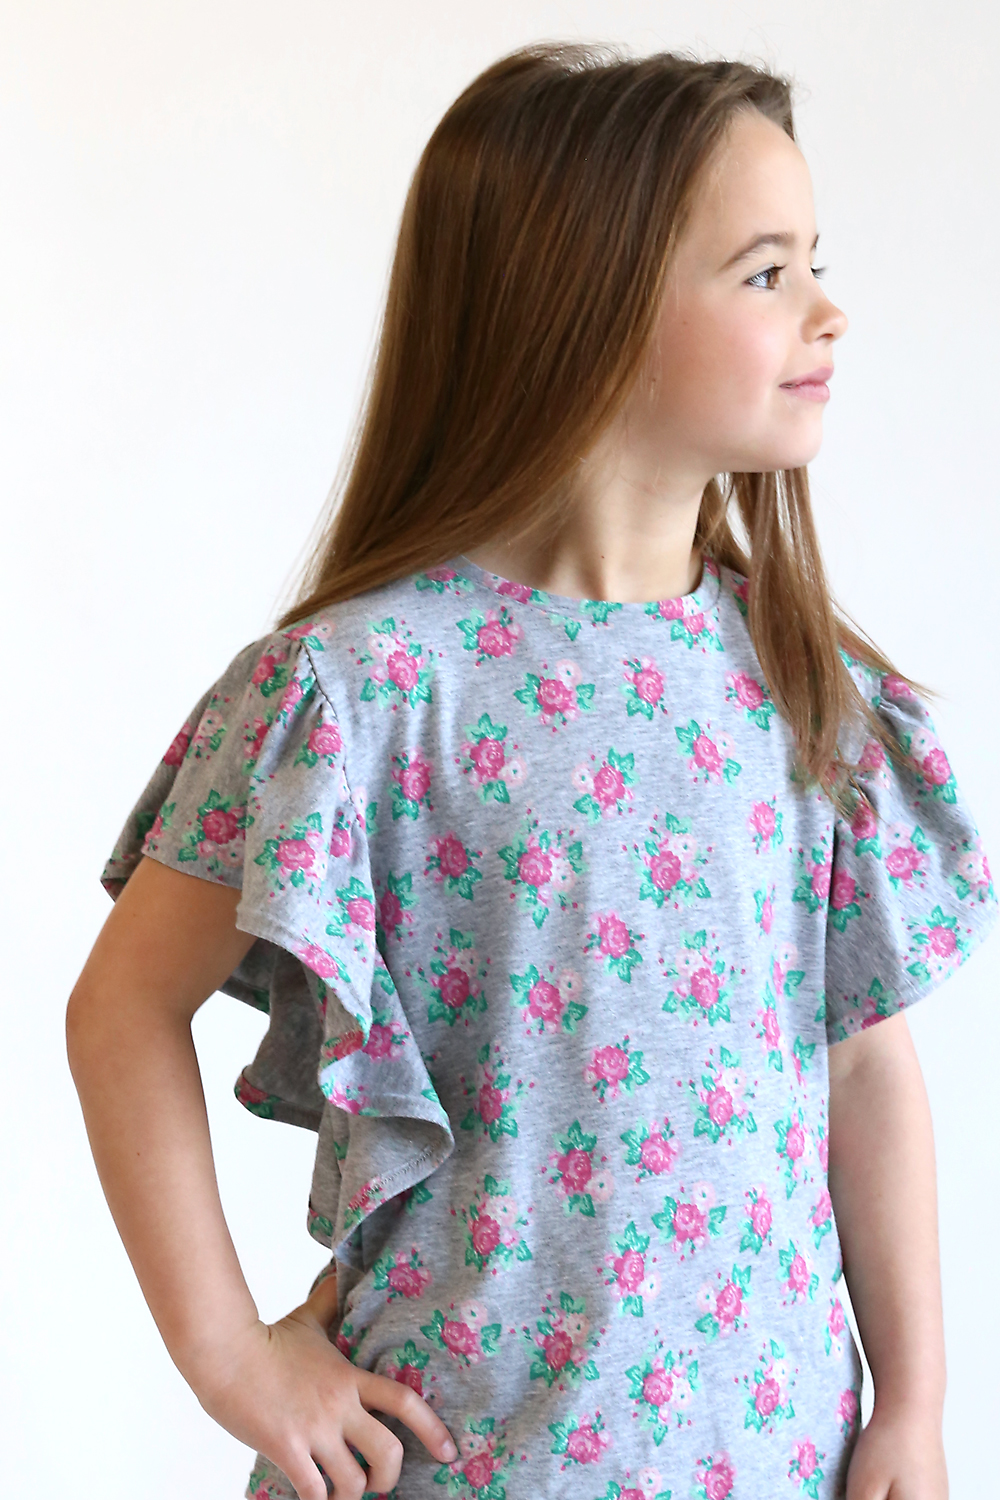 A little girl wearing a floral top with wavy sleeves